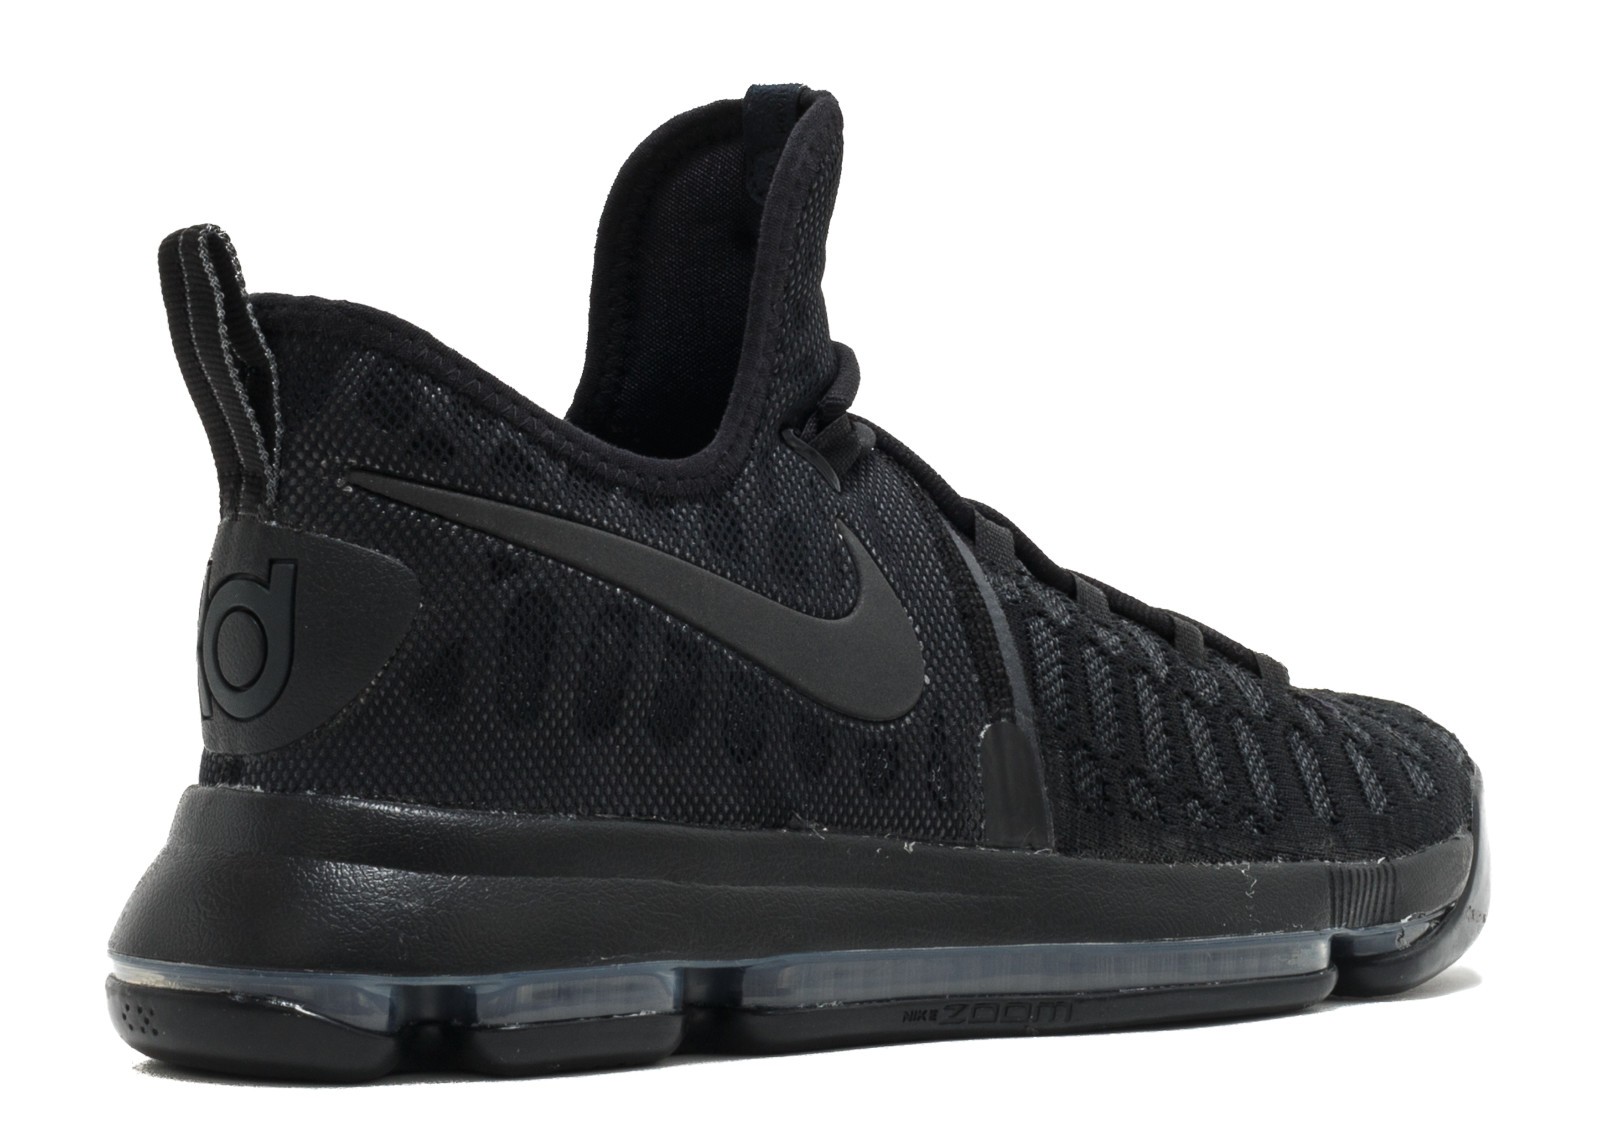 raket herten band MultiscaleconsultingShops - 001 - nike air affect iii leather price in  texas - Zoom Kd 9 Blackout Black Anthracite 843392